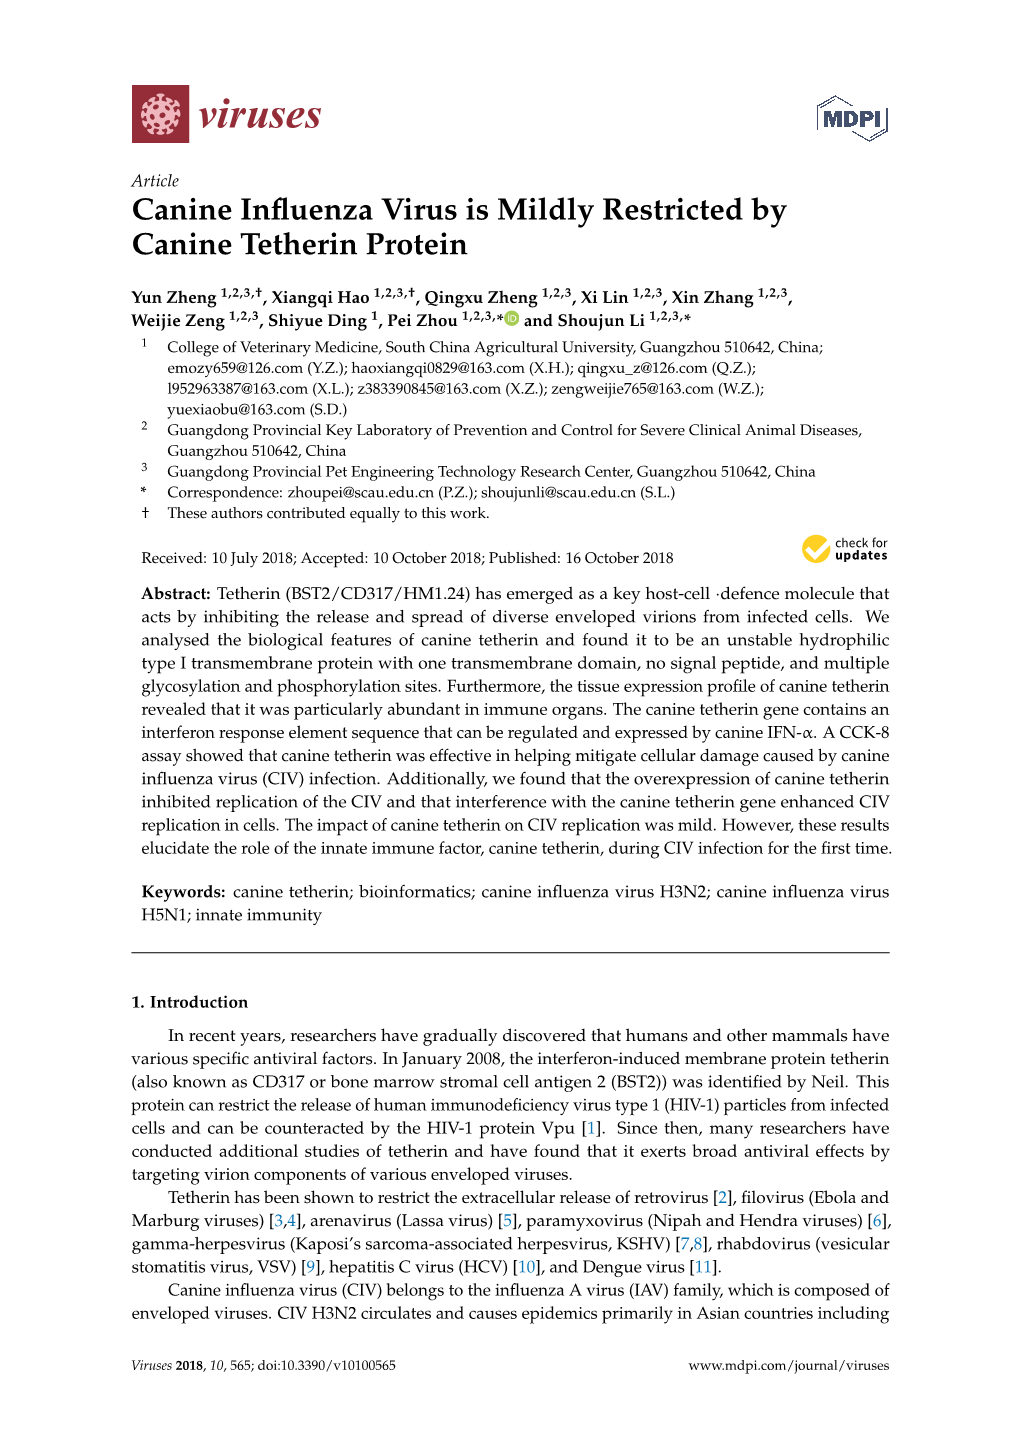 Canine Influenza Virus Is Mildly Restricted by Canine Tetherin Protein